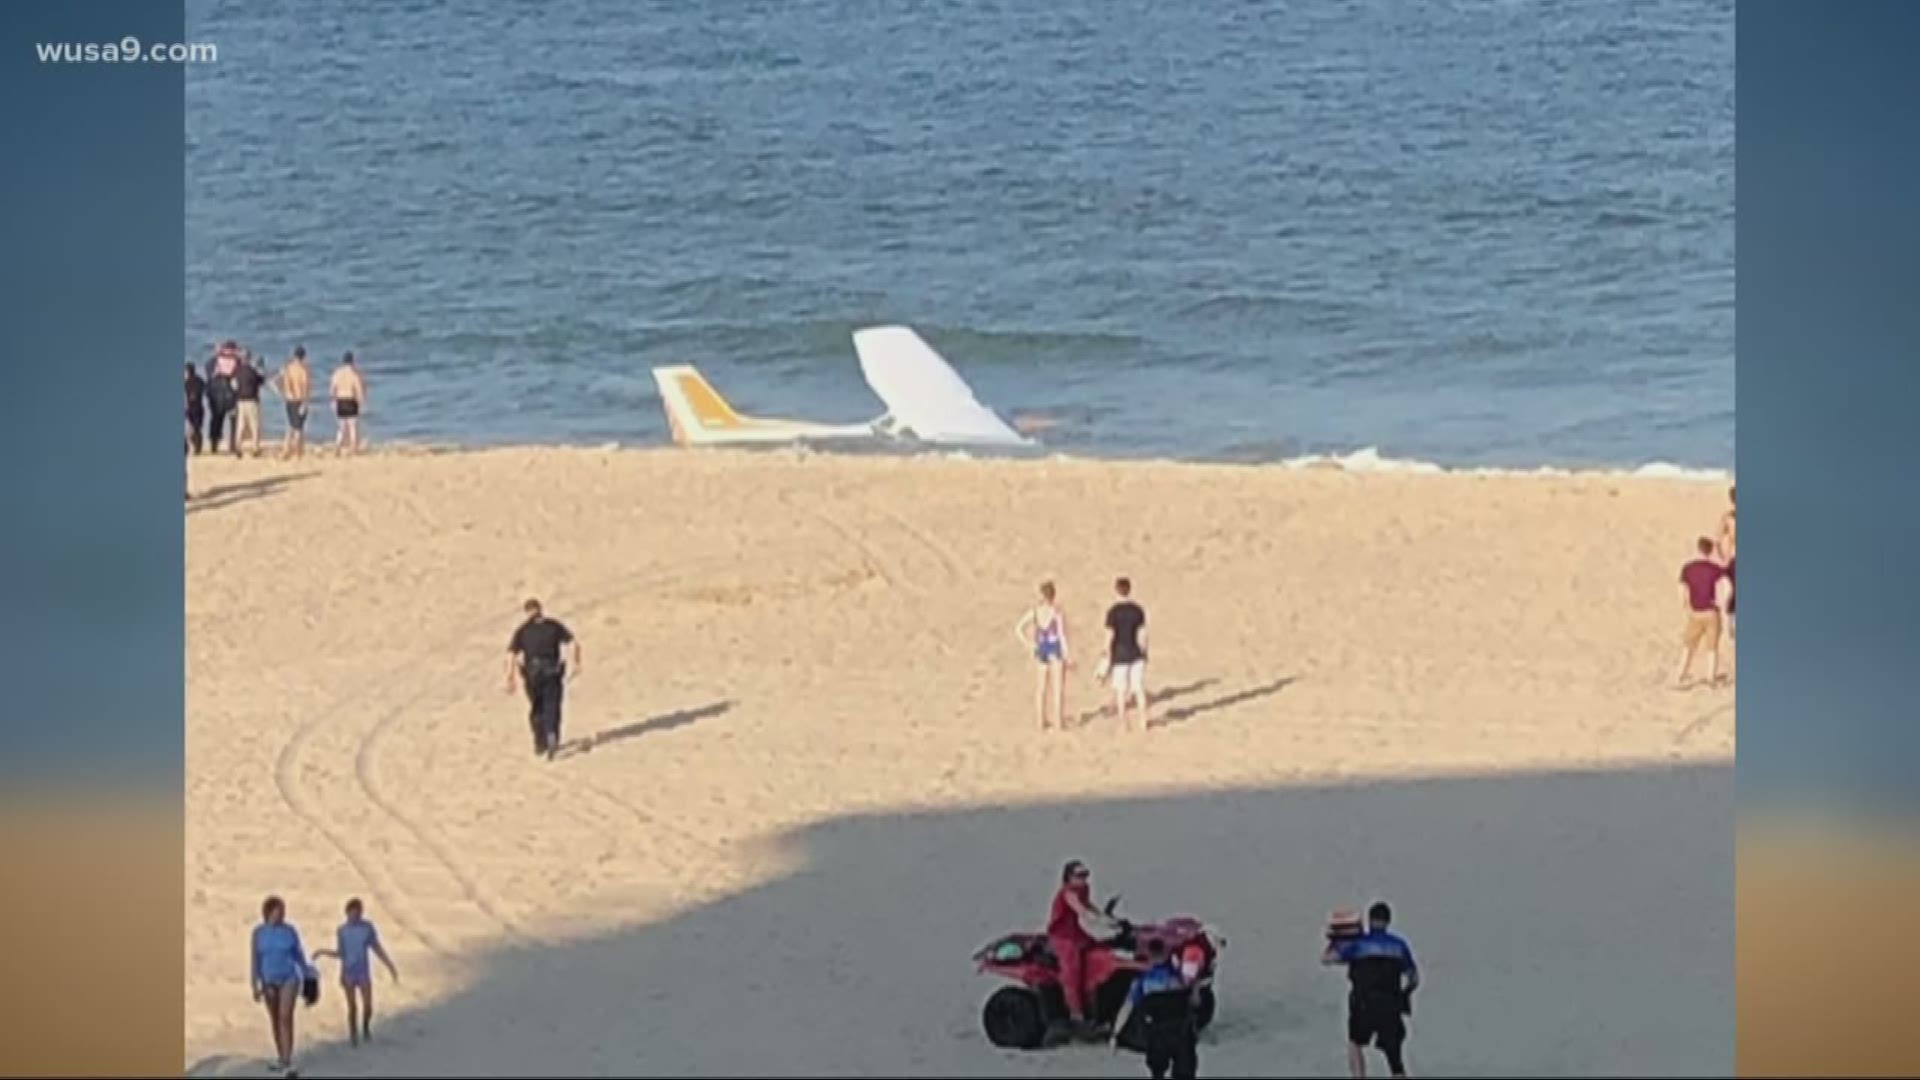 A plane went down near the main drag of Ocean City, Maryland on Tuesday night, around 6:15 p.m.